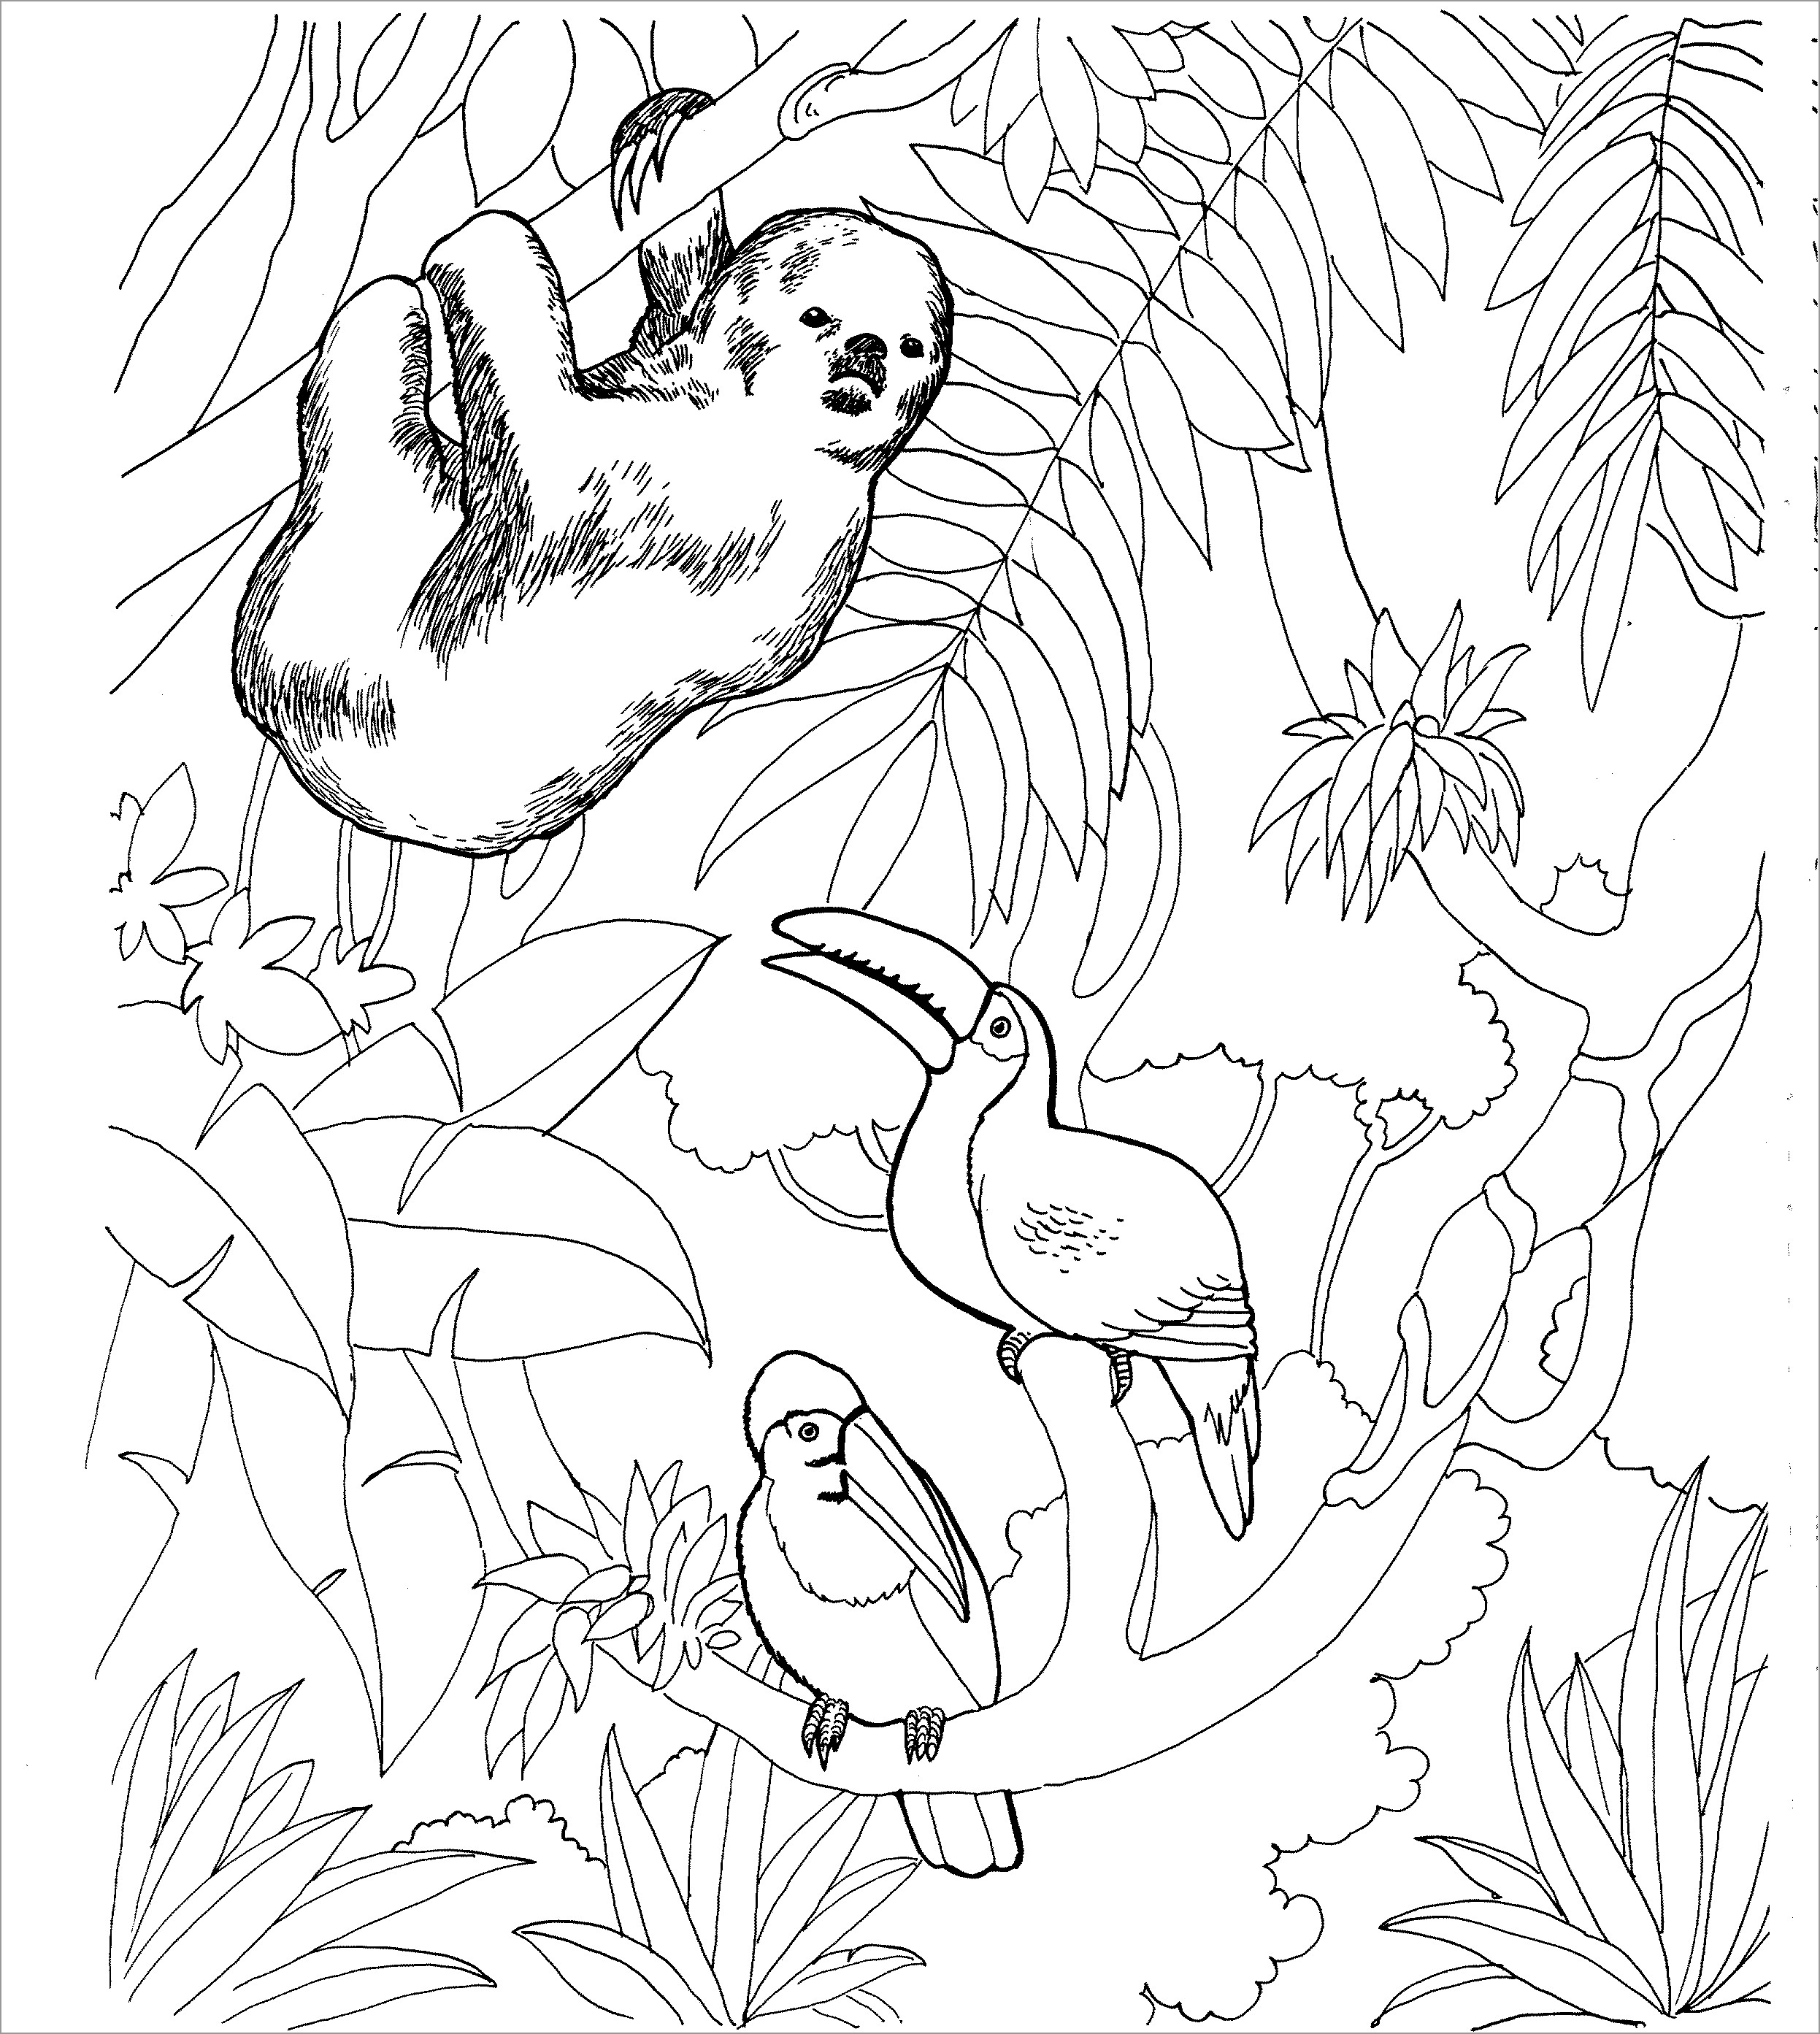 Sloth In the Jungle Coloring Page   ColoringBay